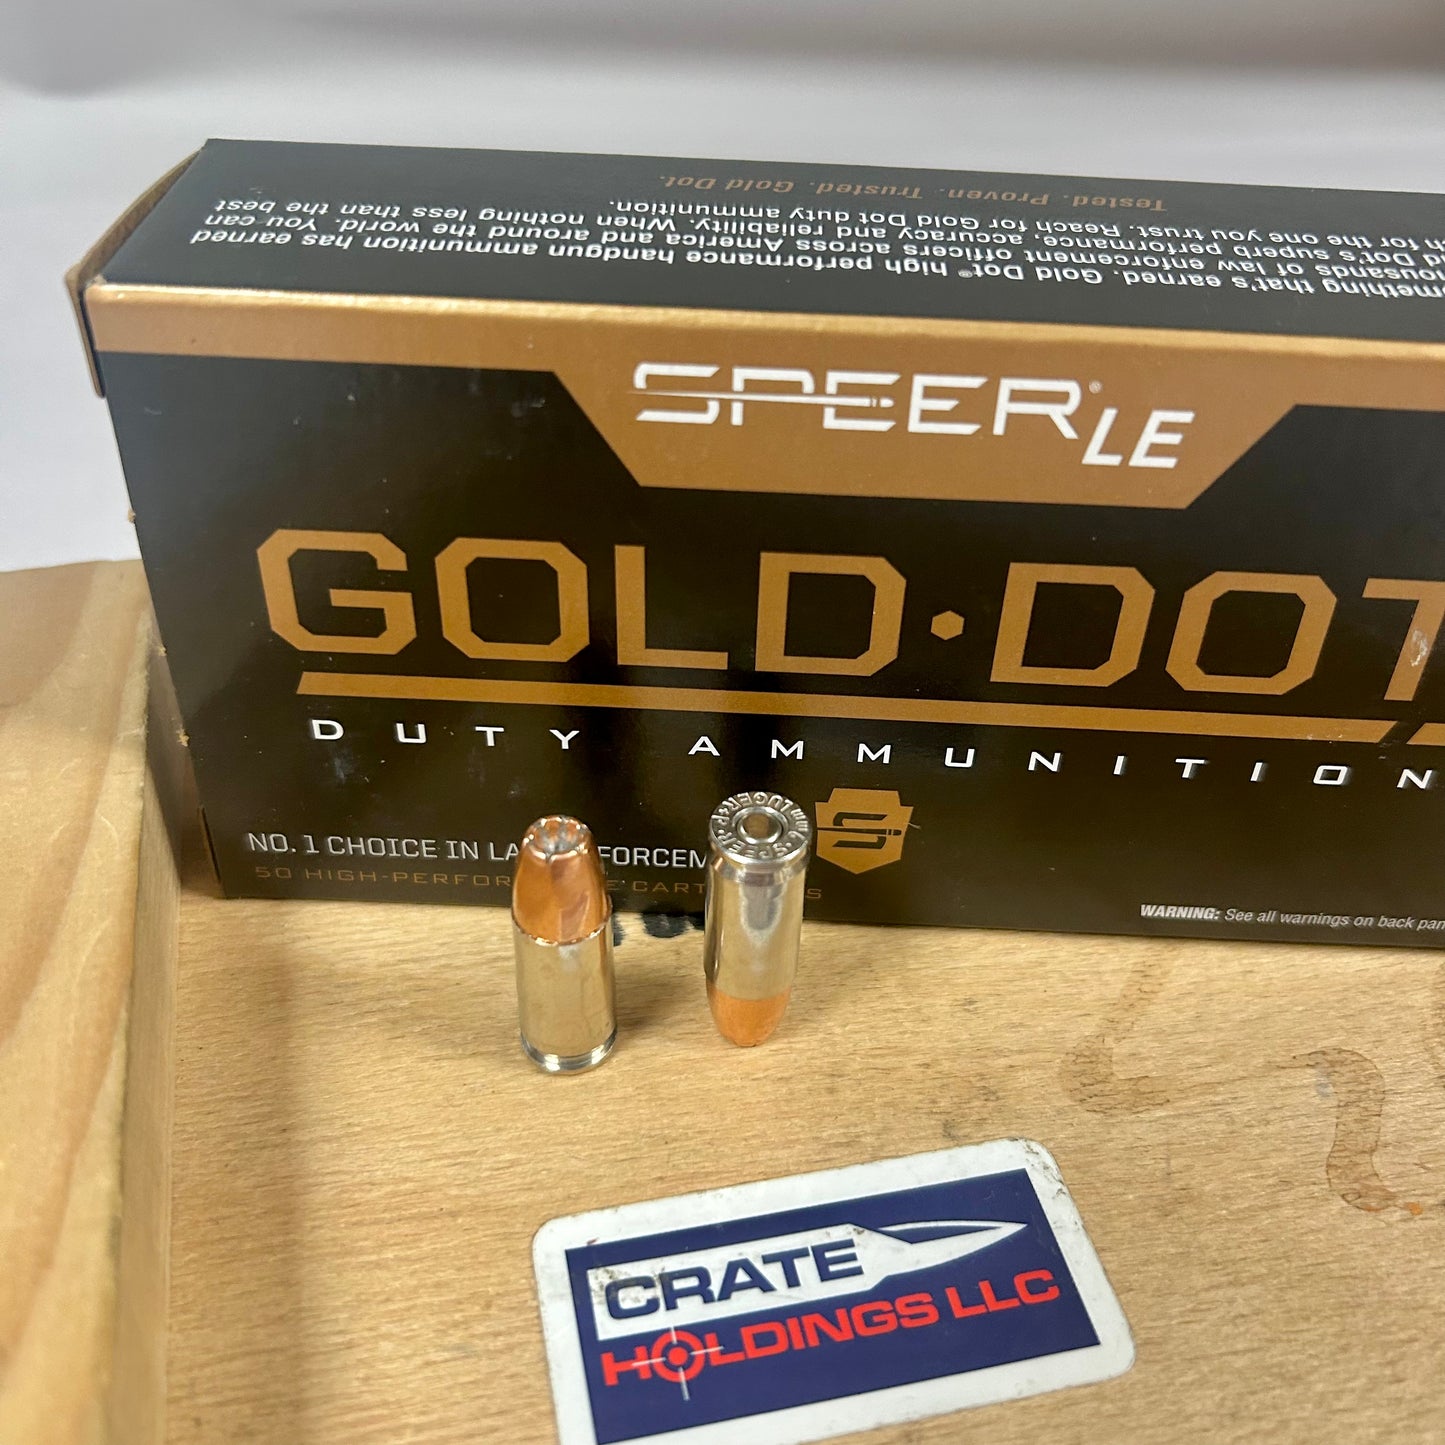 Free Shipping - 500 Rounds Speer Gold Dot 9mm Luger +P Ammo 124gr GDHP - 53617